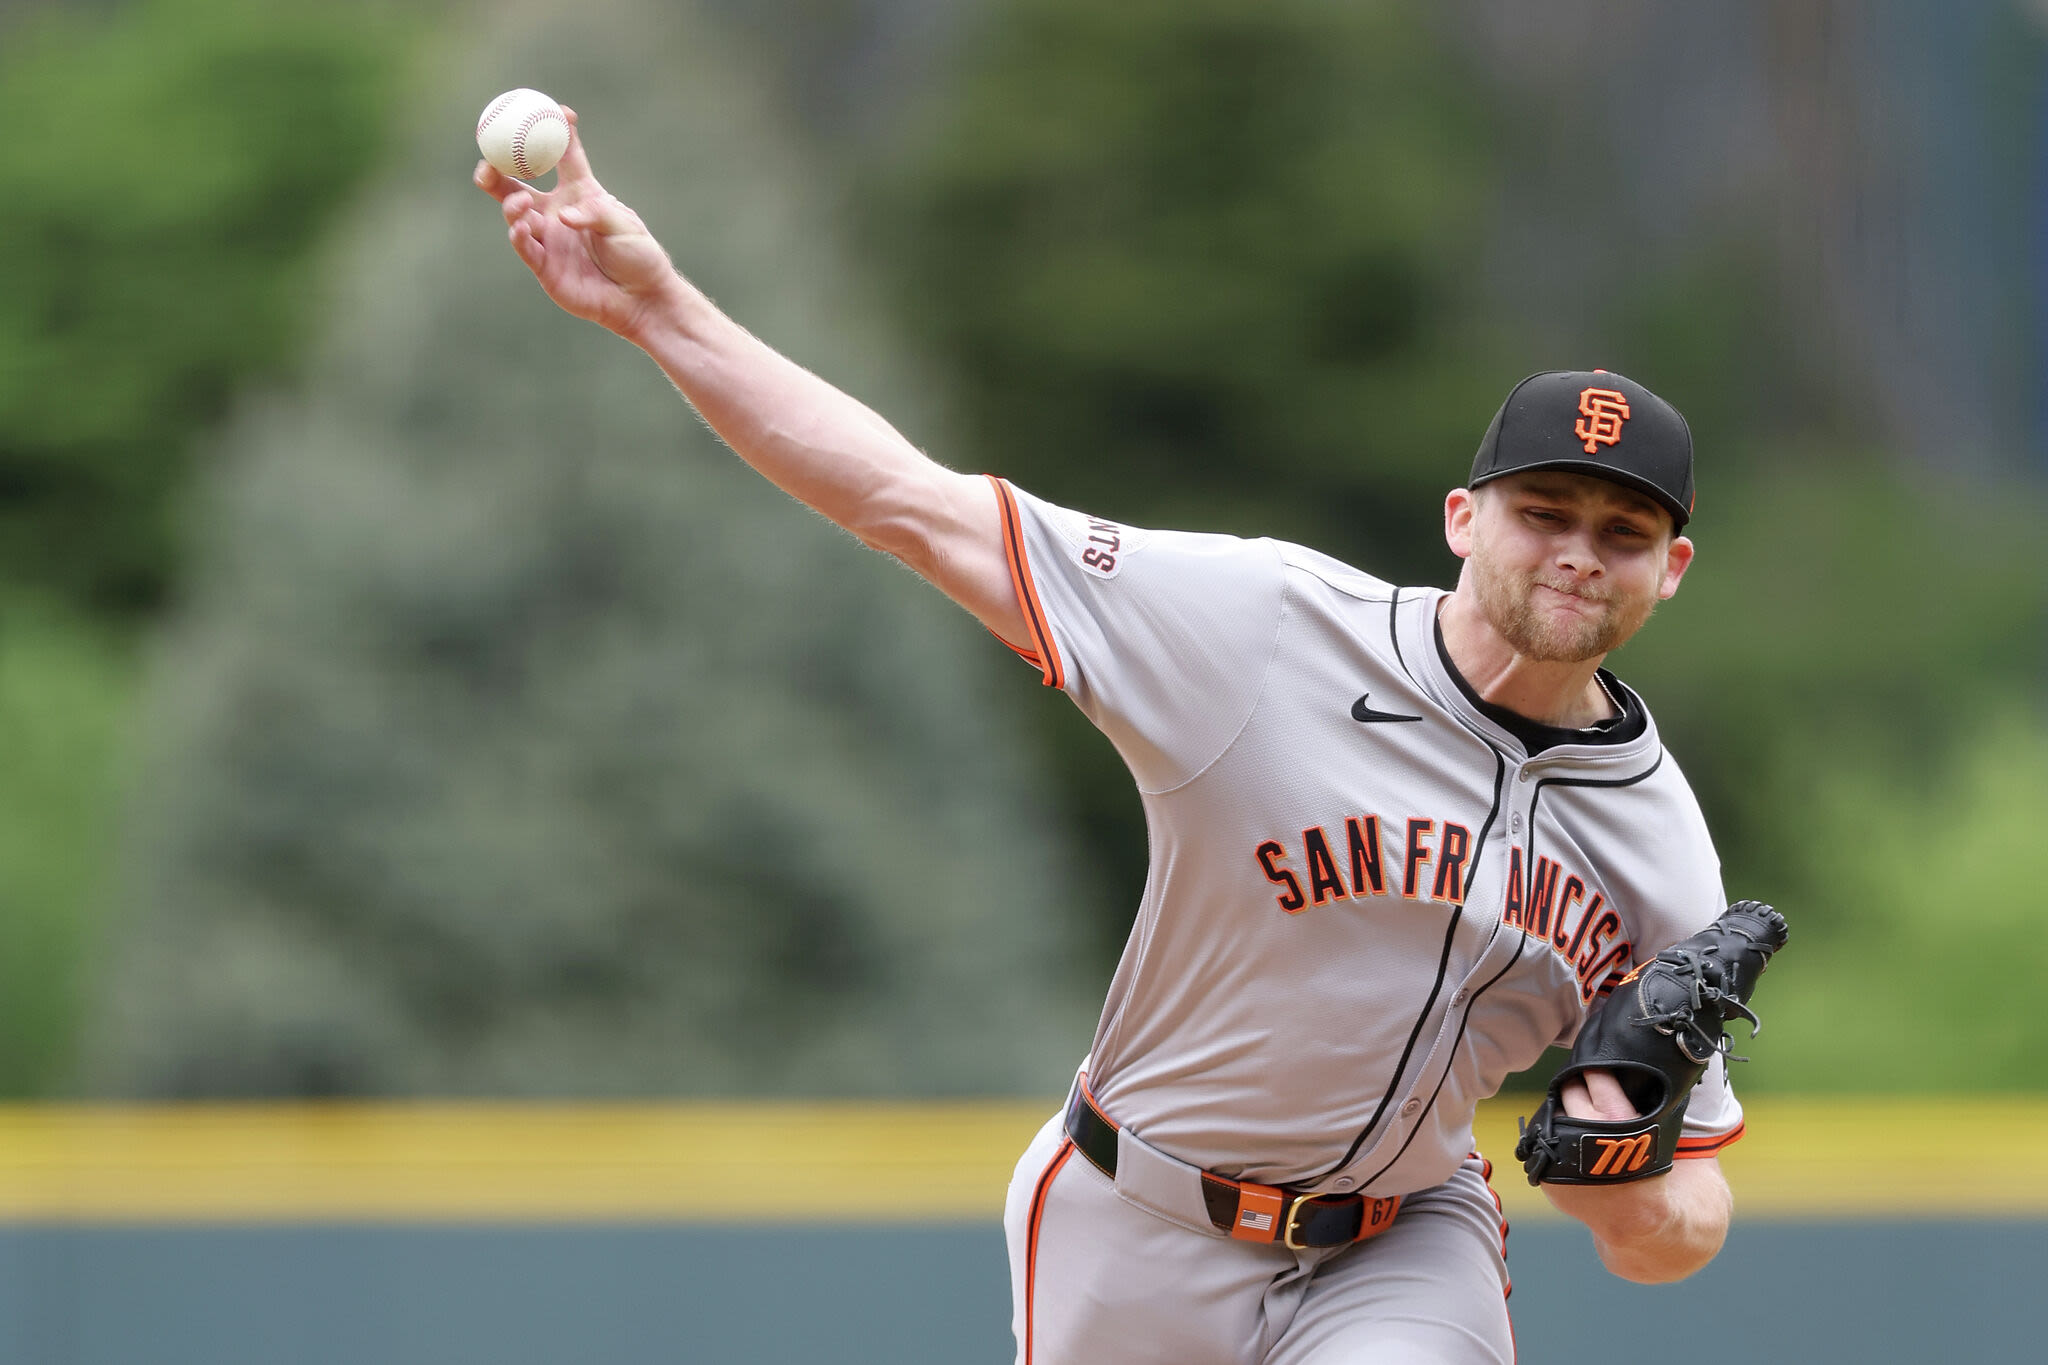 Broadcasters suggest SF Giants pitcher tipped pitches vs. Rockies